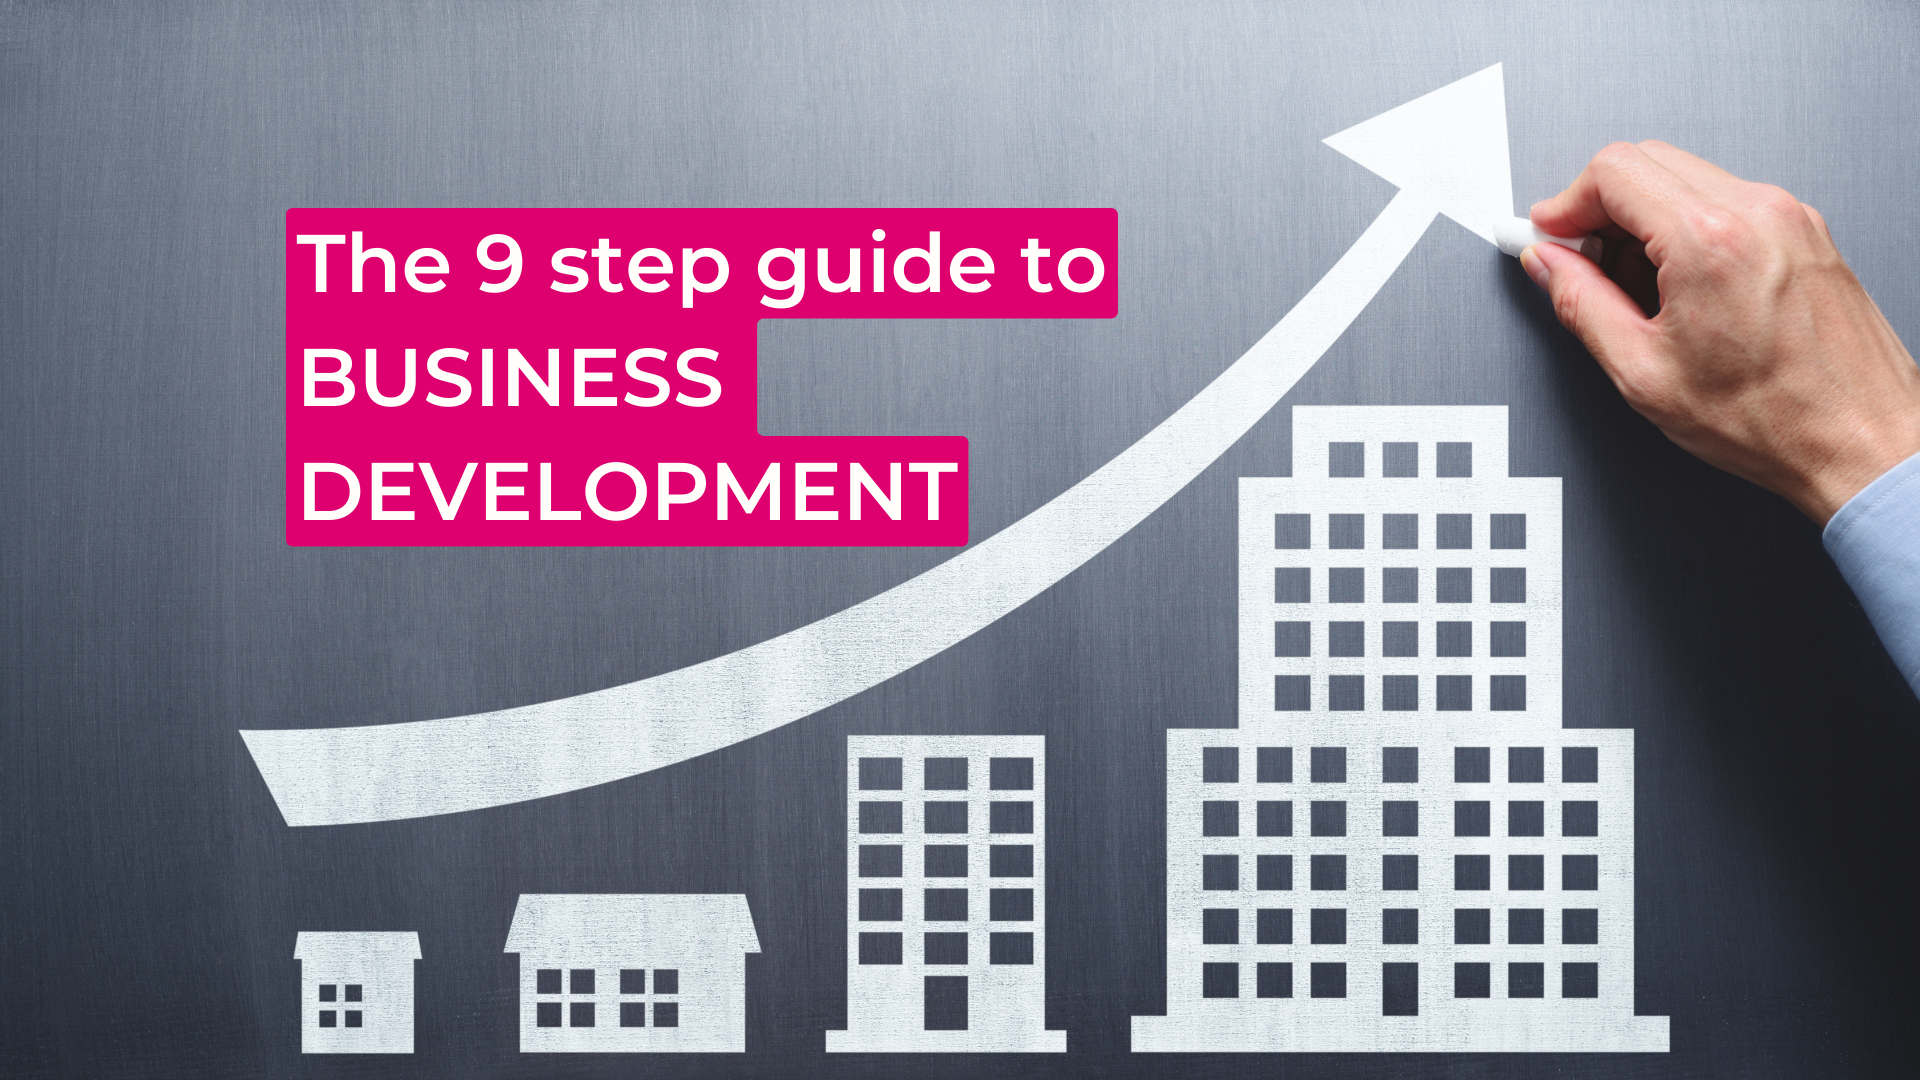 The 9 step guide to business development